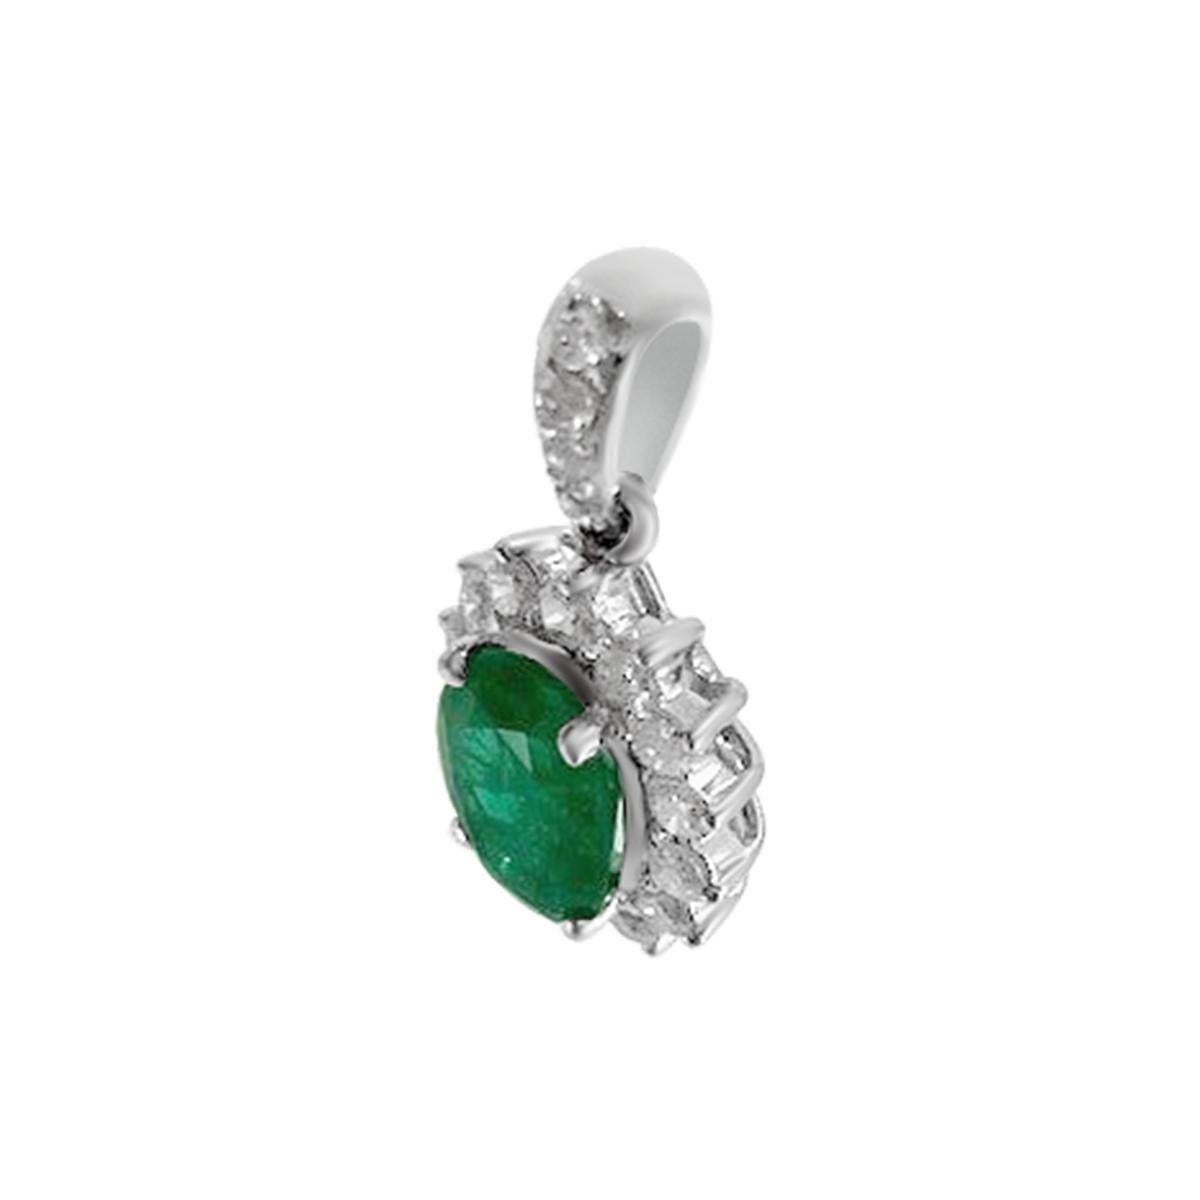 Showcasing A Beautifully Elegant Design, This Emerald Oval Pendant Will Make You Feel Like Royalty. This Gorgeous Genuine Emerald Pendant Showcases An Oval 8x6mm Emerald Gemstone With Diamonds Designed In 14K White Gold.


Style# TS1121P
Emerald: